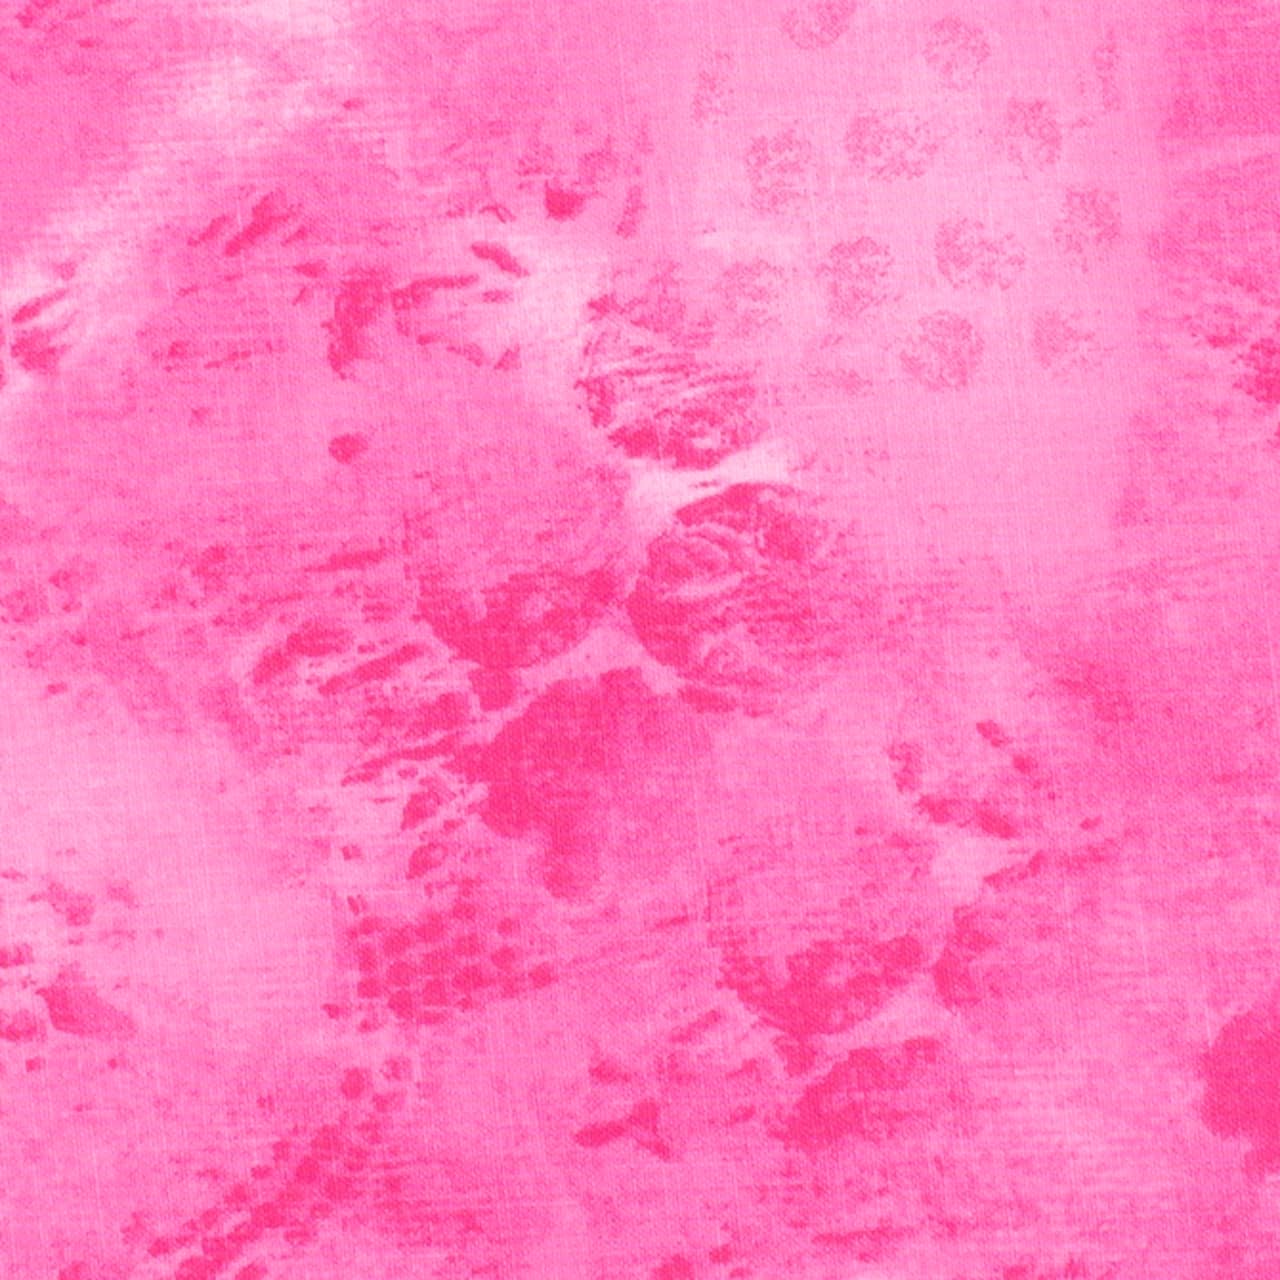 Texture Pink Cotton Fabric